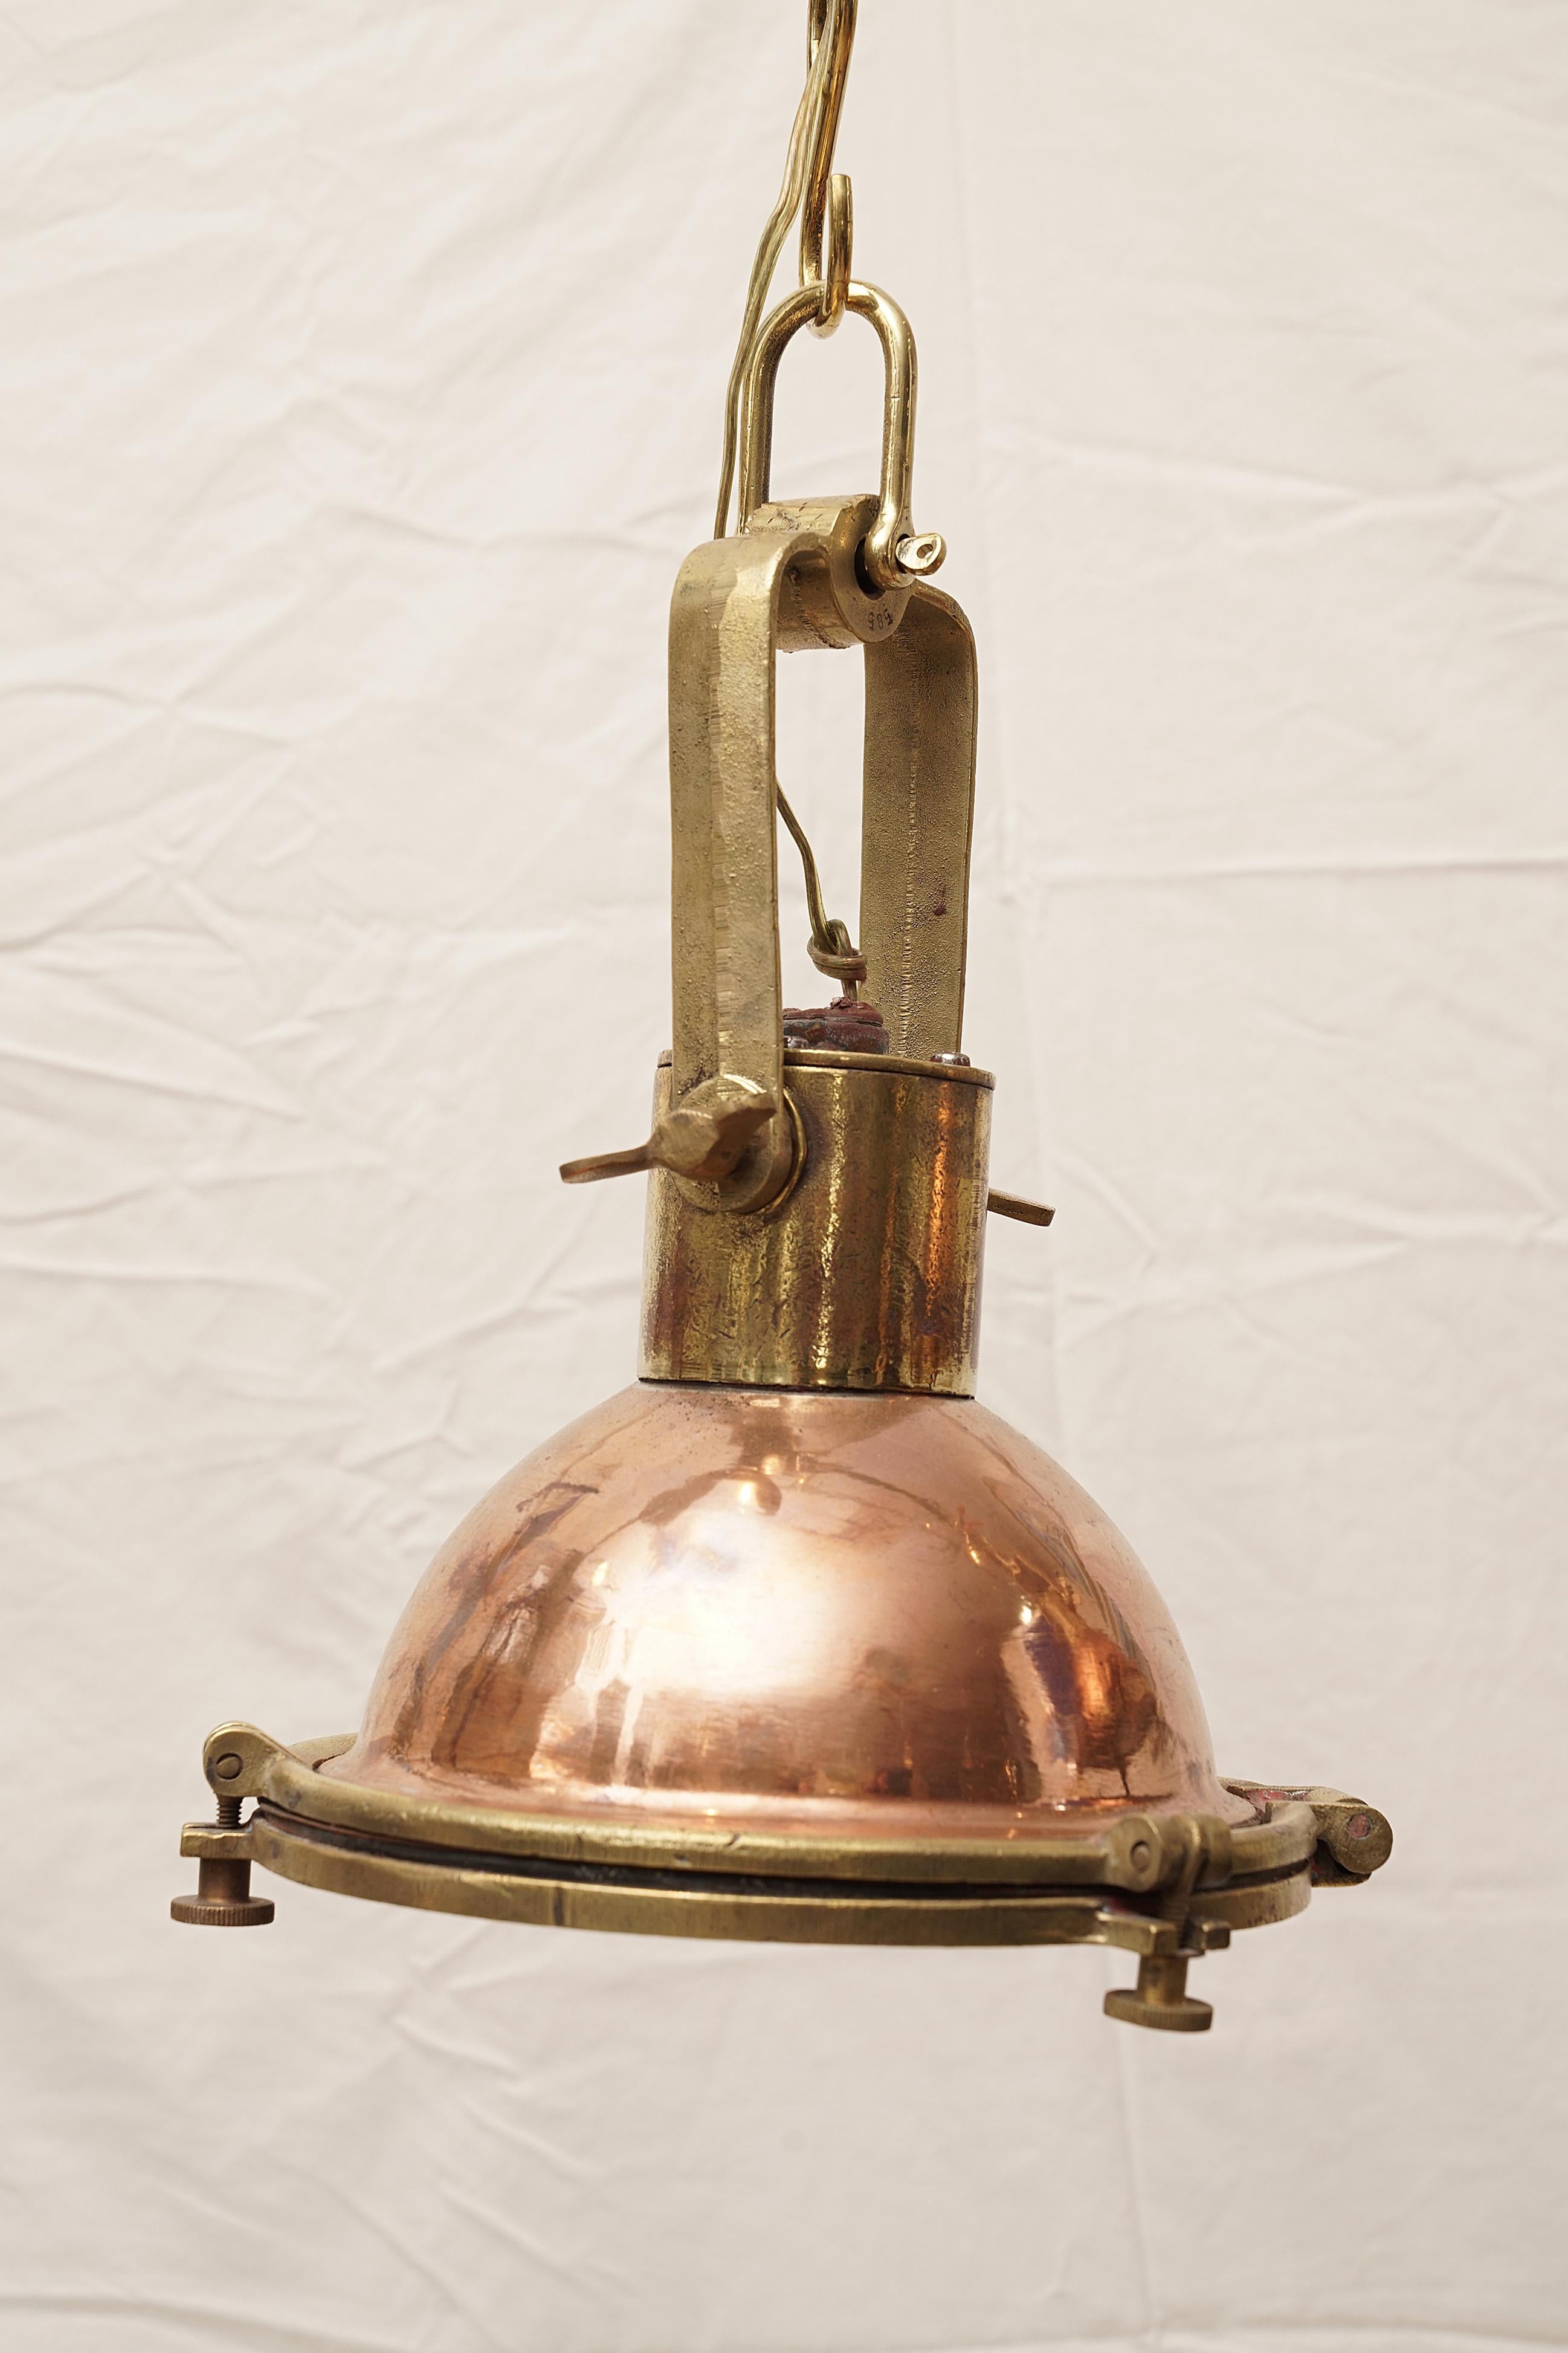 A pair of copper and brass deck lights used on ship's to load and unload cargo at night. Hinged face plate for changing the light bulb and reflective paint inside which helped to create additional light. Rewired for American use. Originally